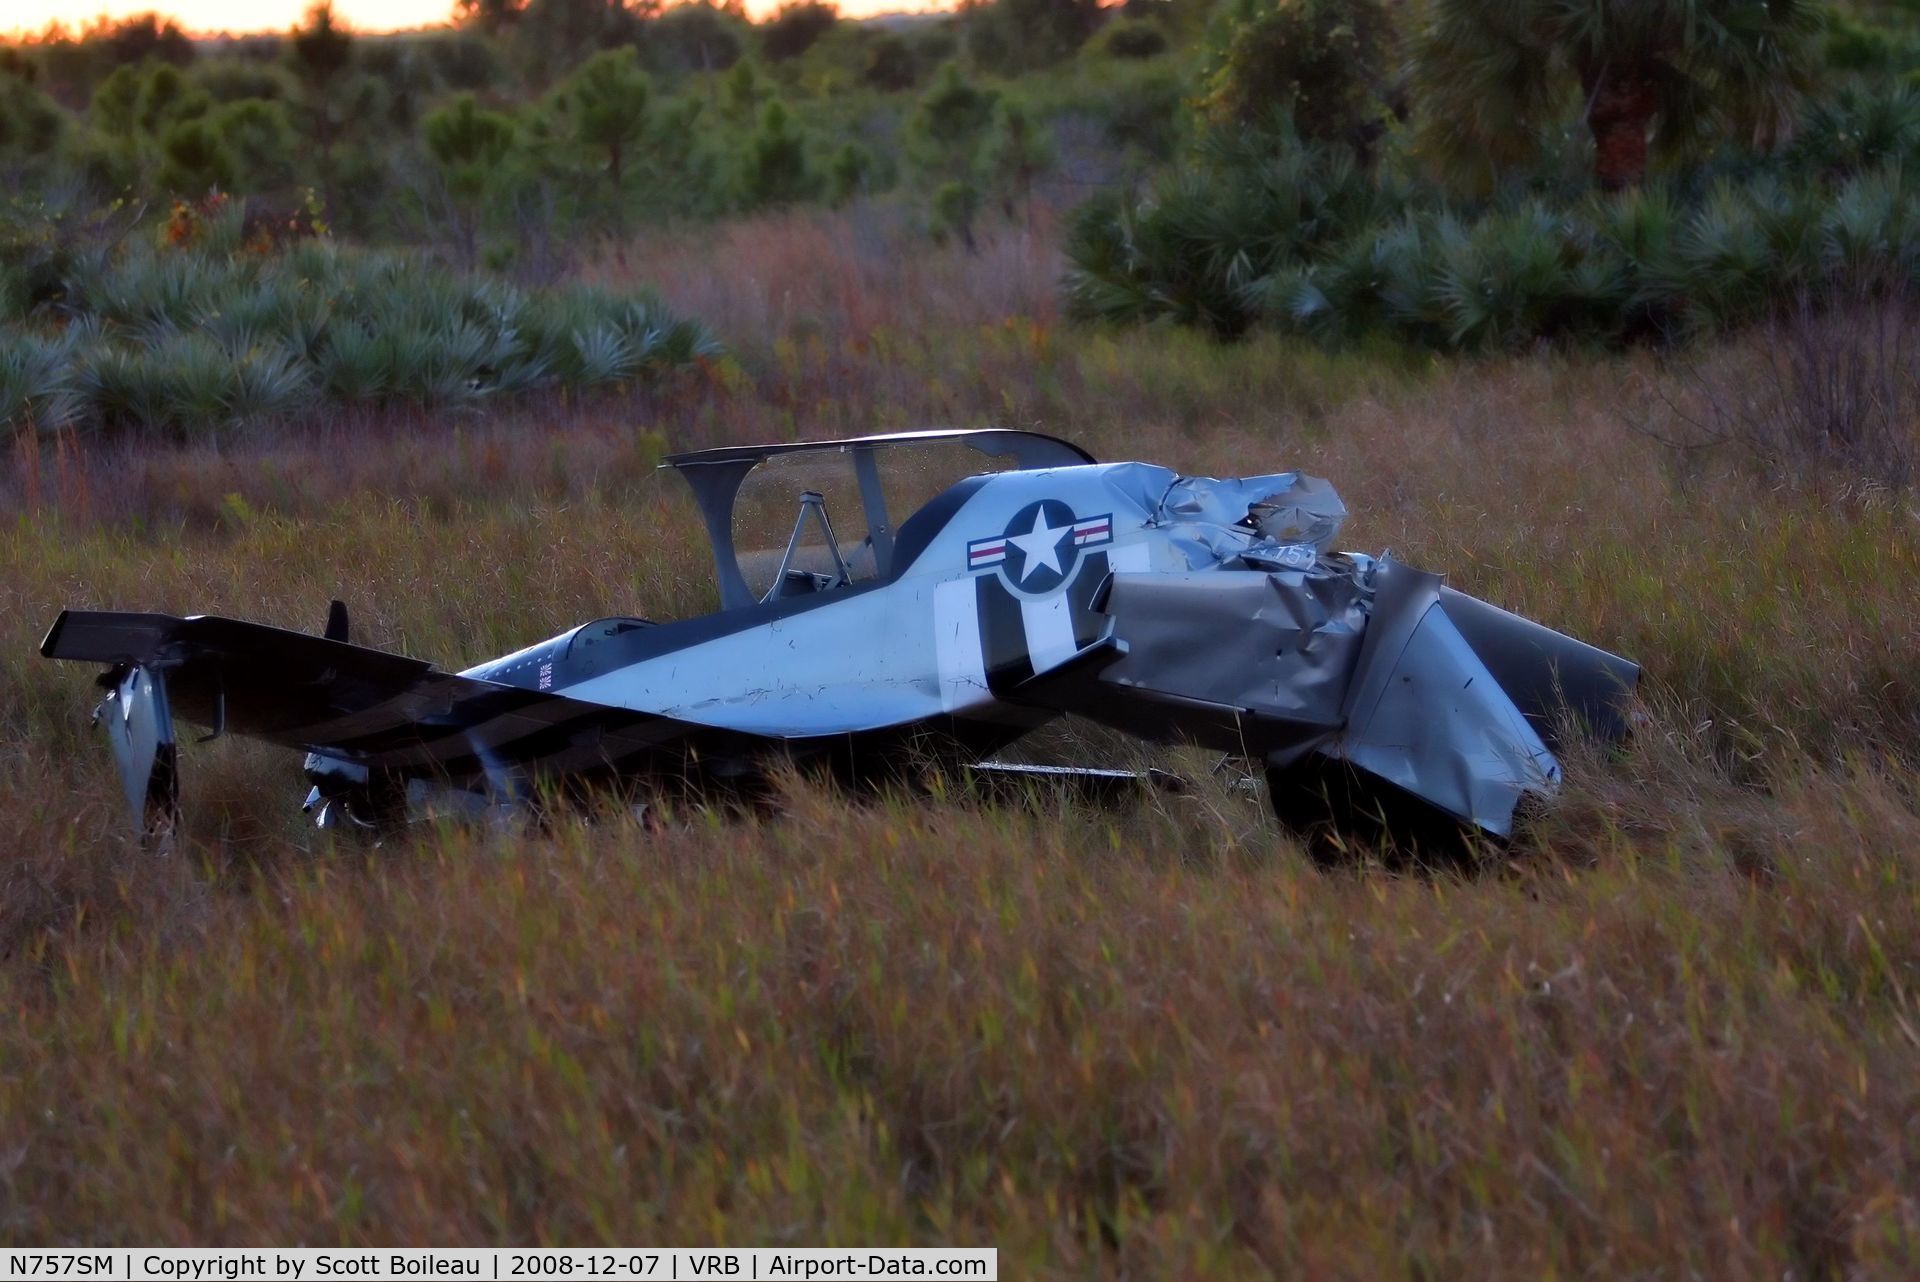 N757SM, 2007 Team Rocket F1 EVO Rocket C/N 150, The wreckage of a single engine F1 Rocket EVO lays in a marshy area of the St.Sebastian River Preserve after the pilot and only occupant made an emergency landing after loosing power of his aircraft at an altitude of around 1000 ft Sunday afternoon. The p